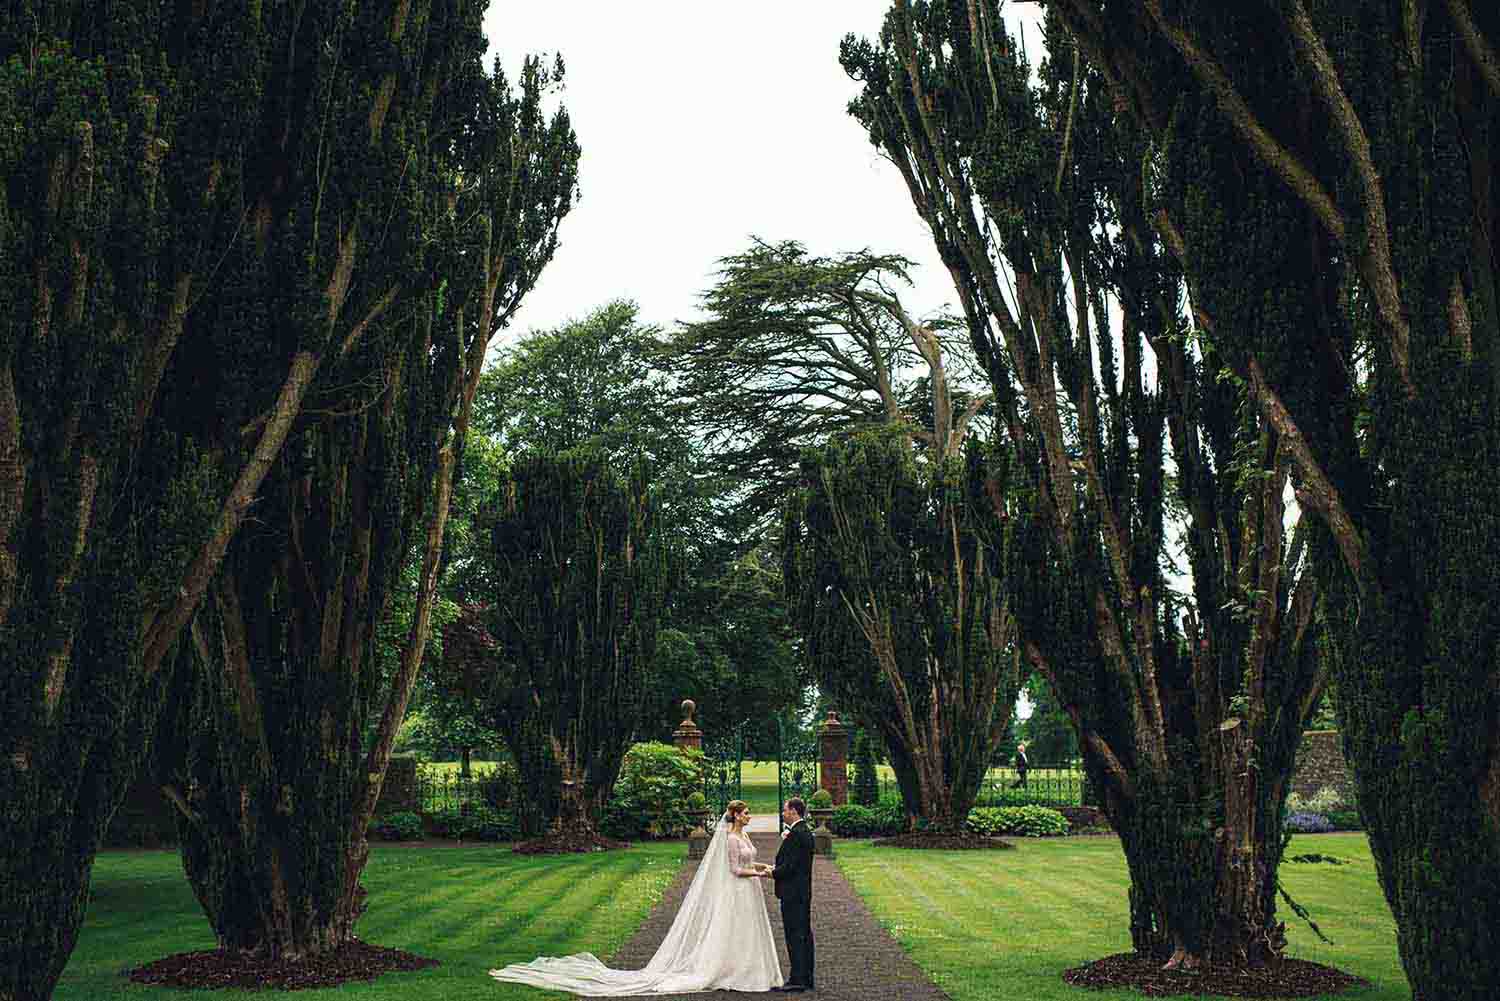 Bride and groom together in the gardens on their wedding day